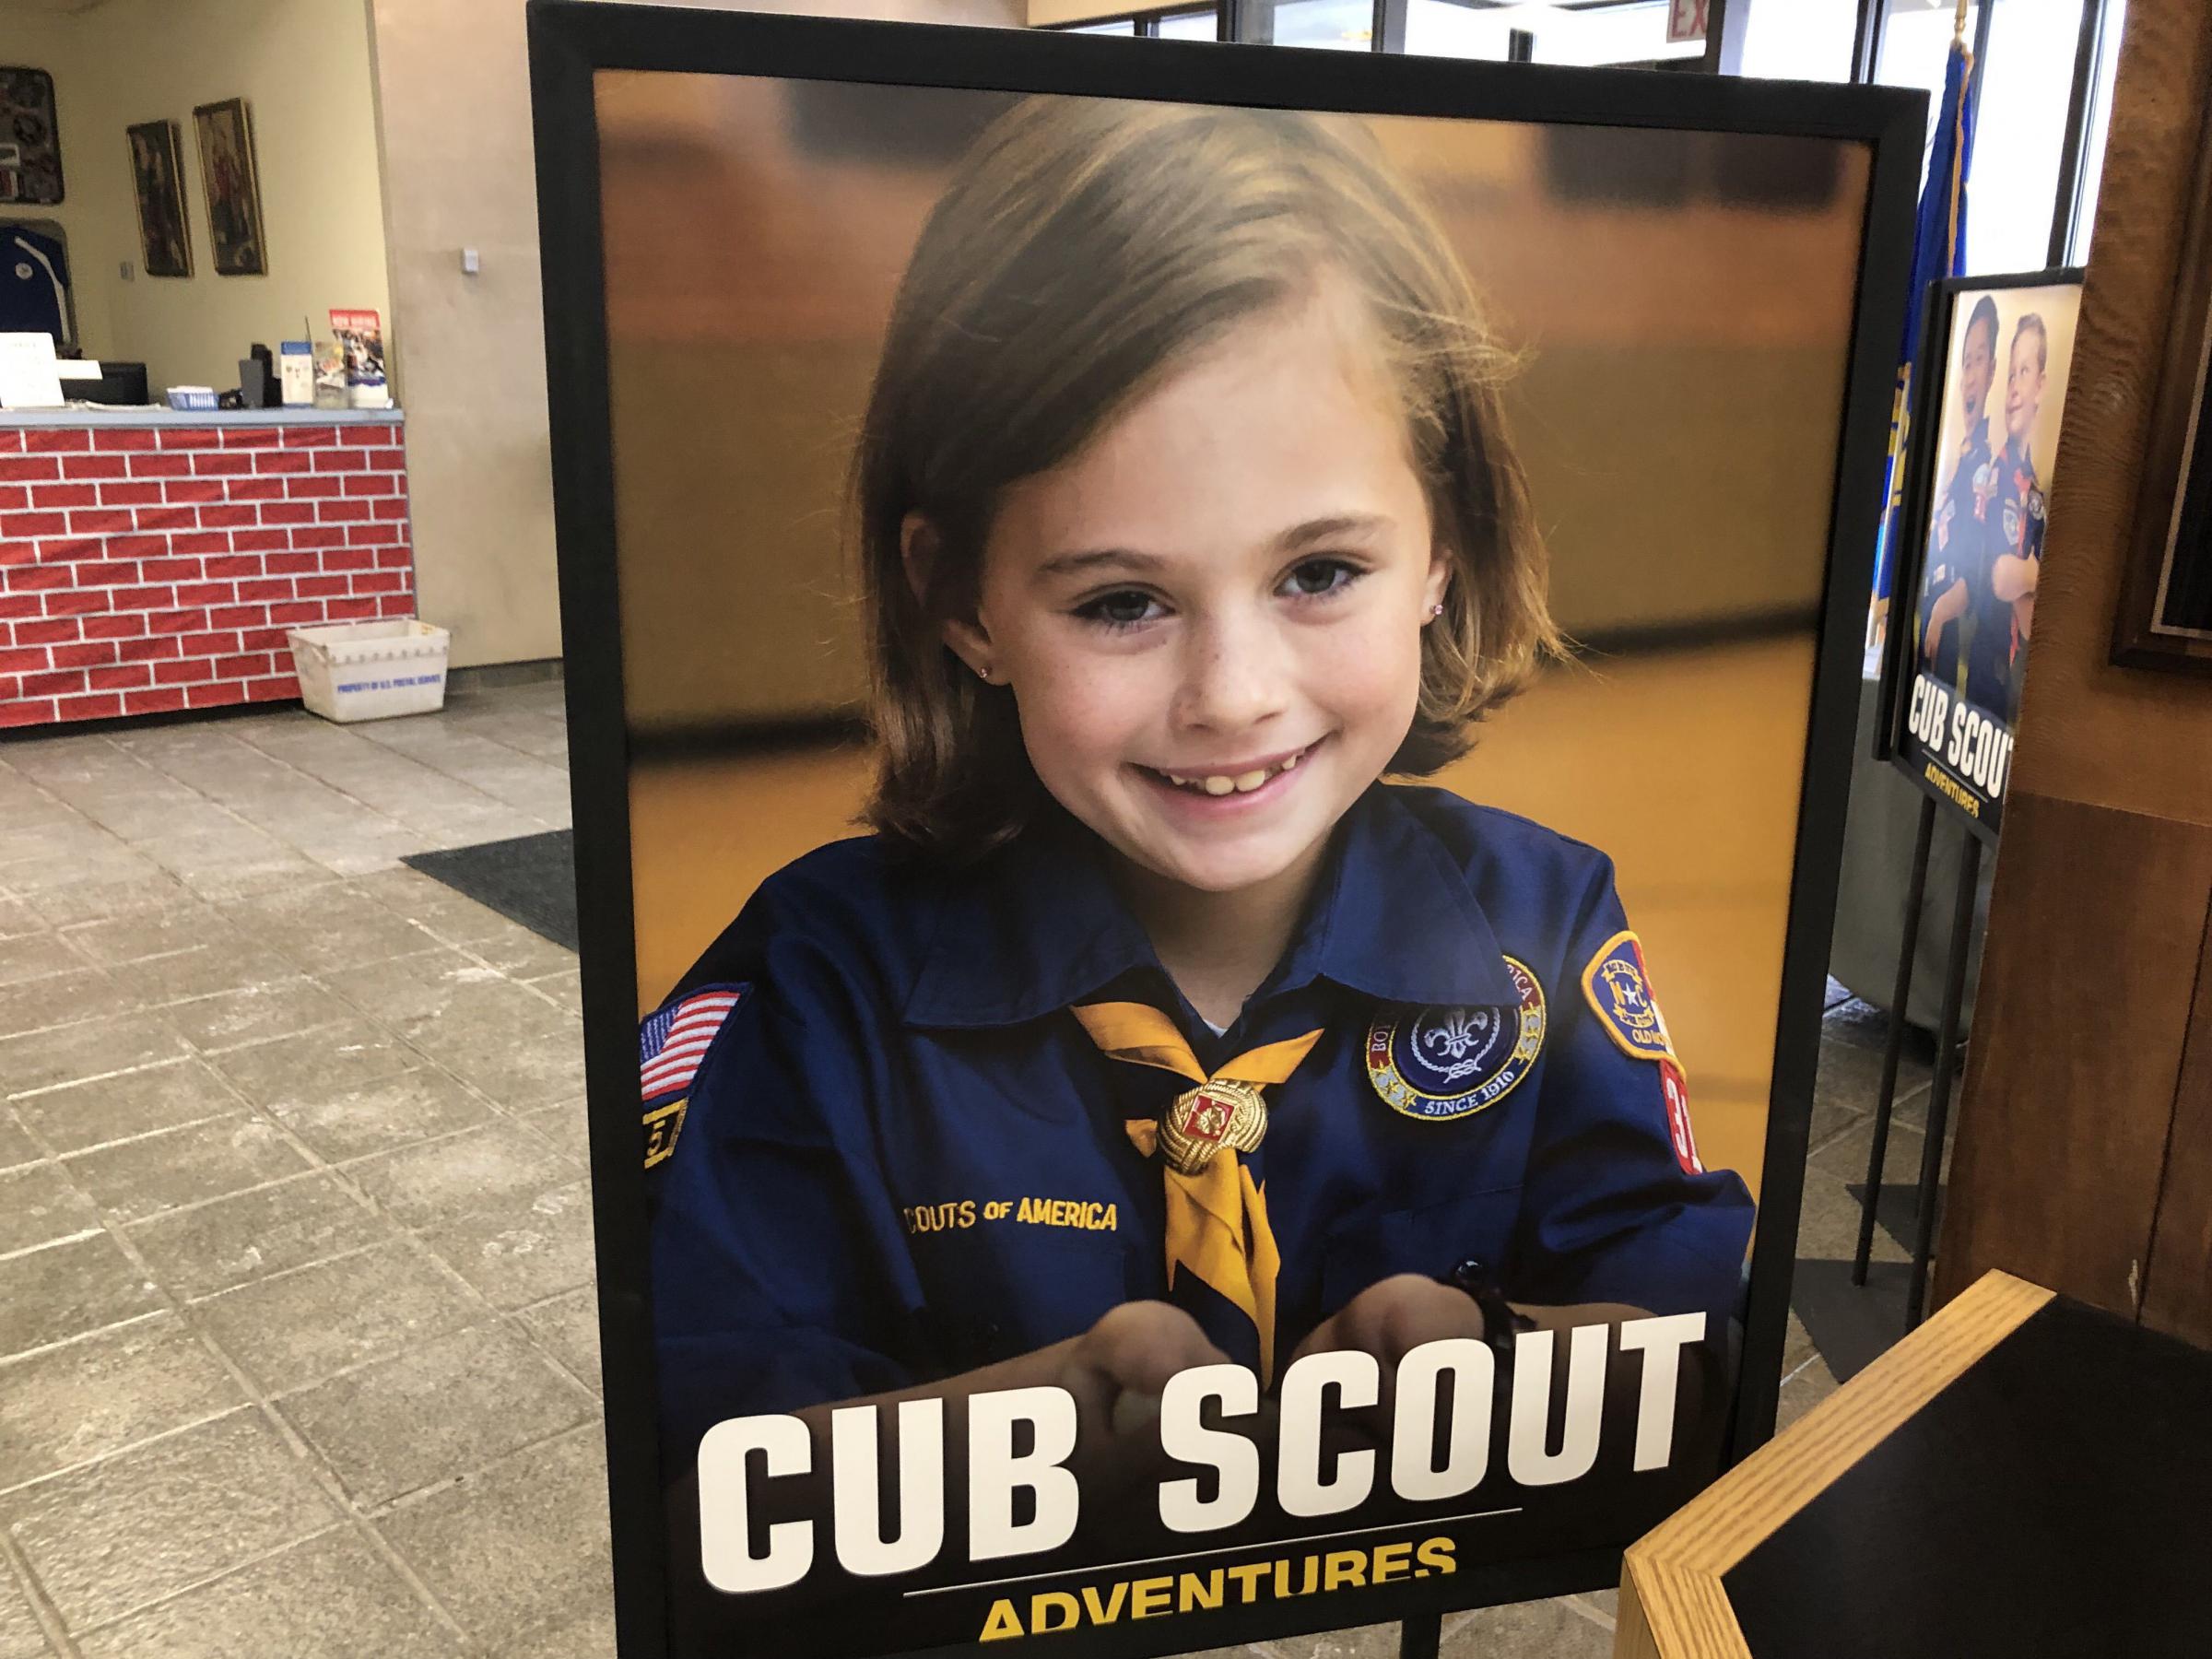 welcoming girls, boy scouts program is now scouts bsa